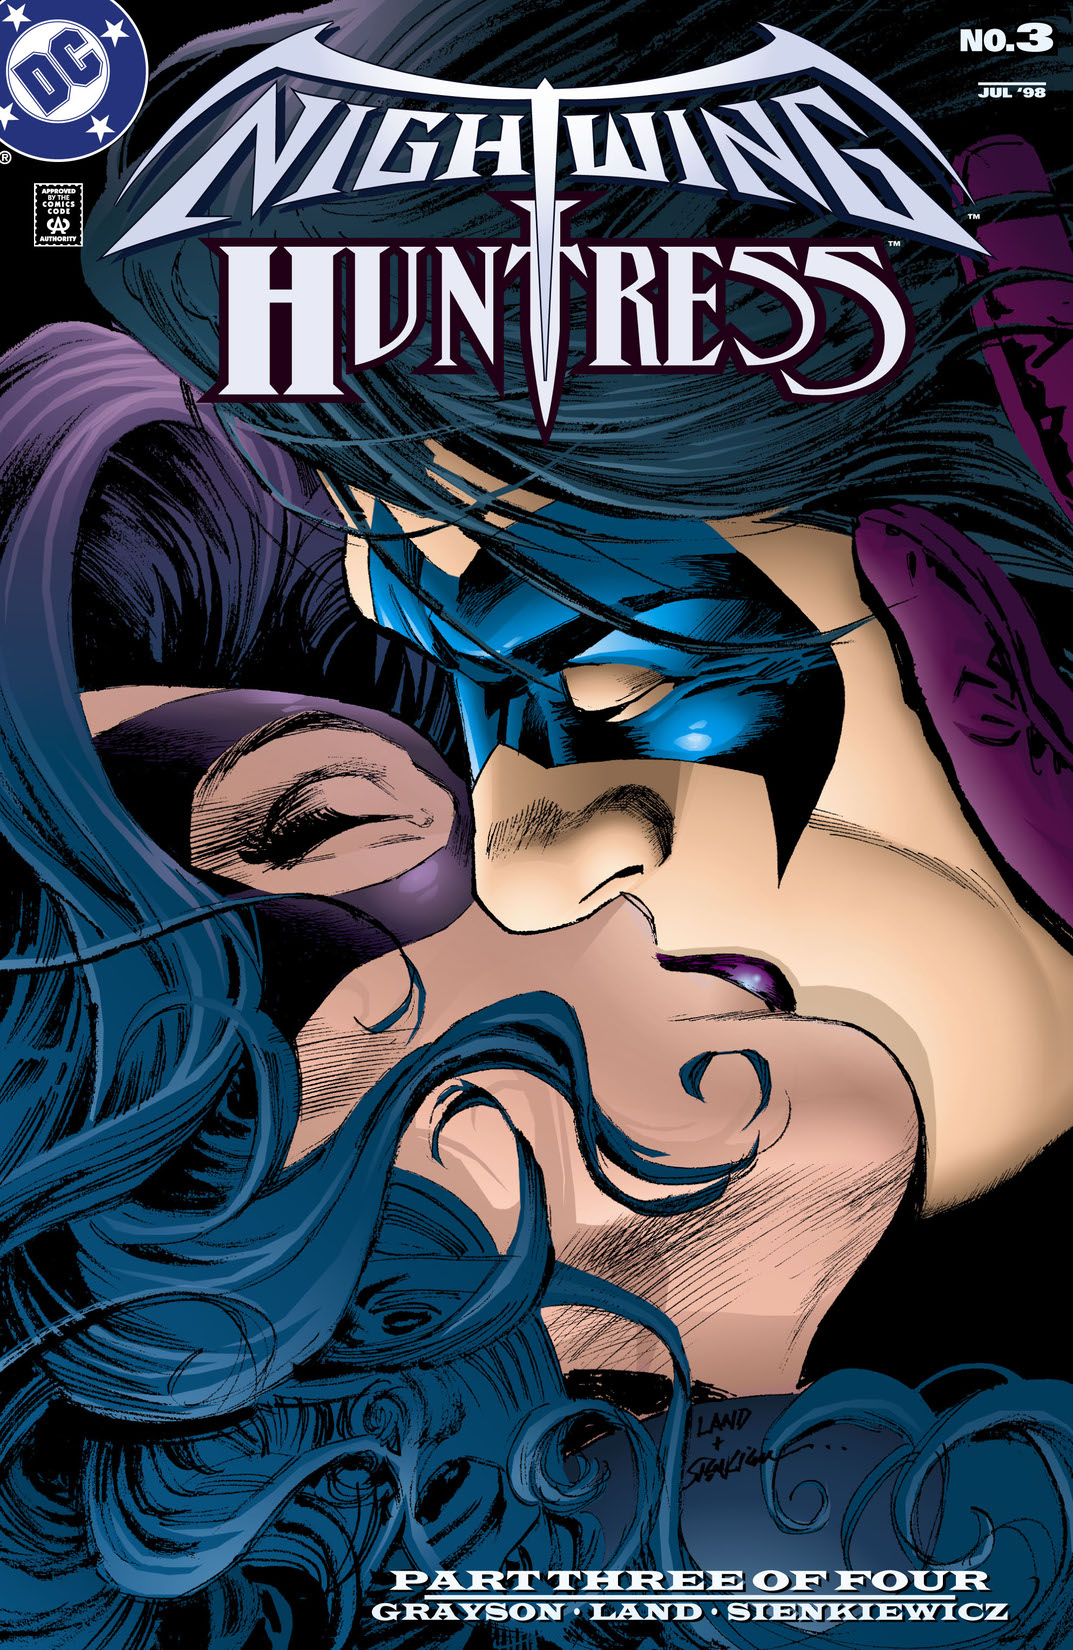 Nightwing and Huntress #3 preview images